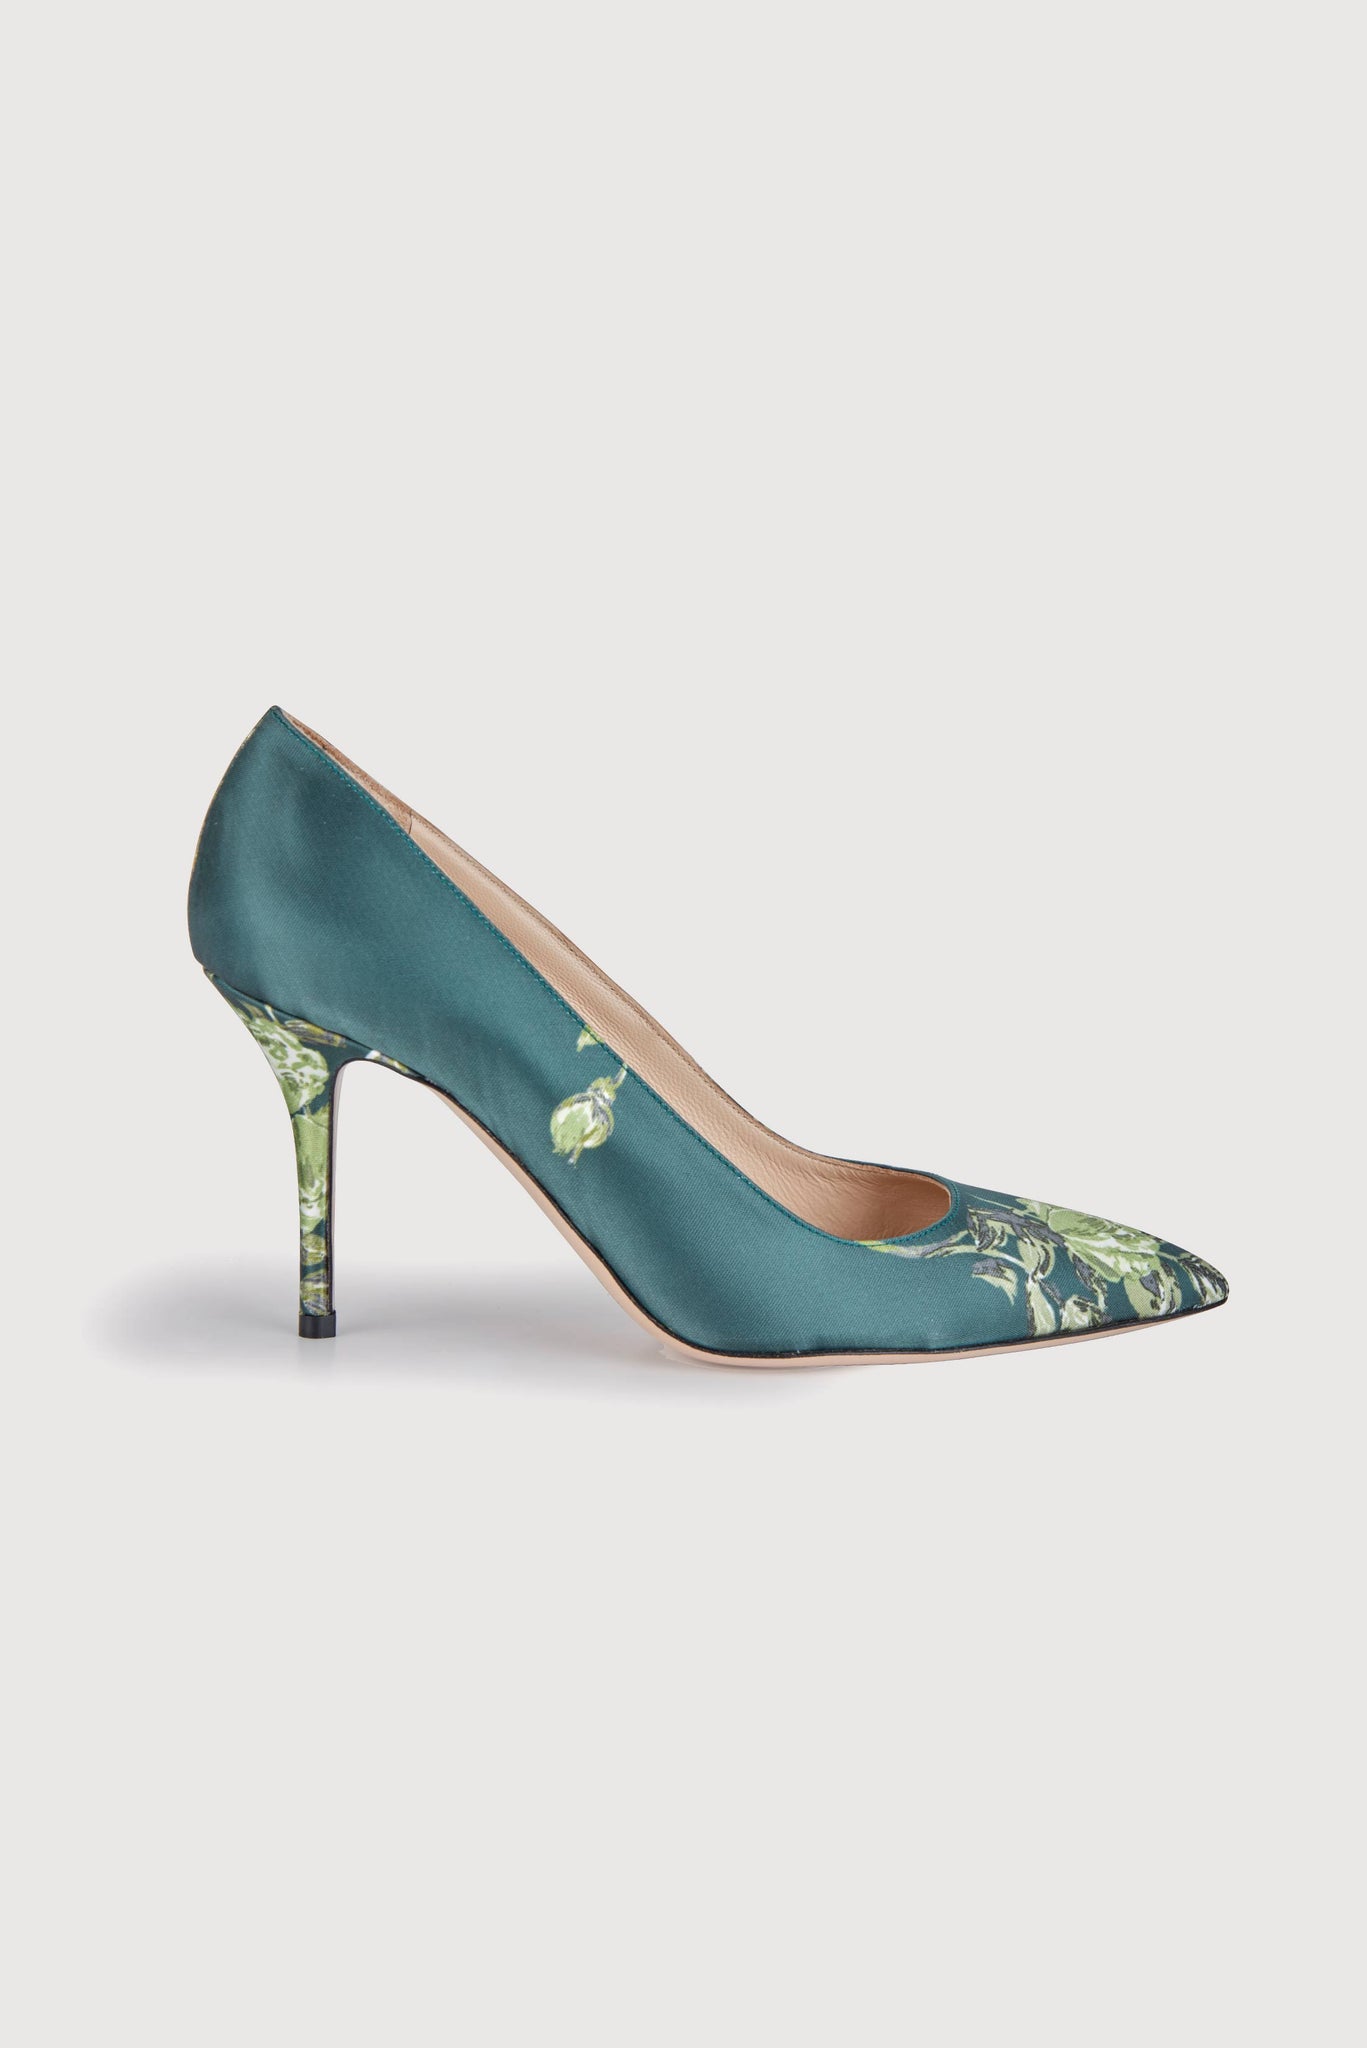 Sophia Heeled Shoes in Emerald Floral Printed Satin